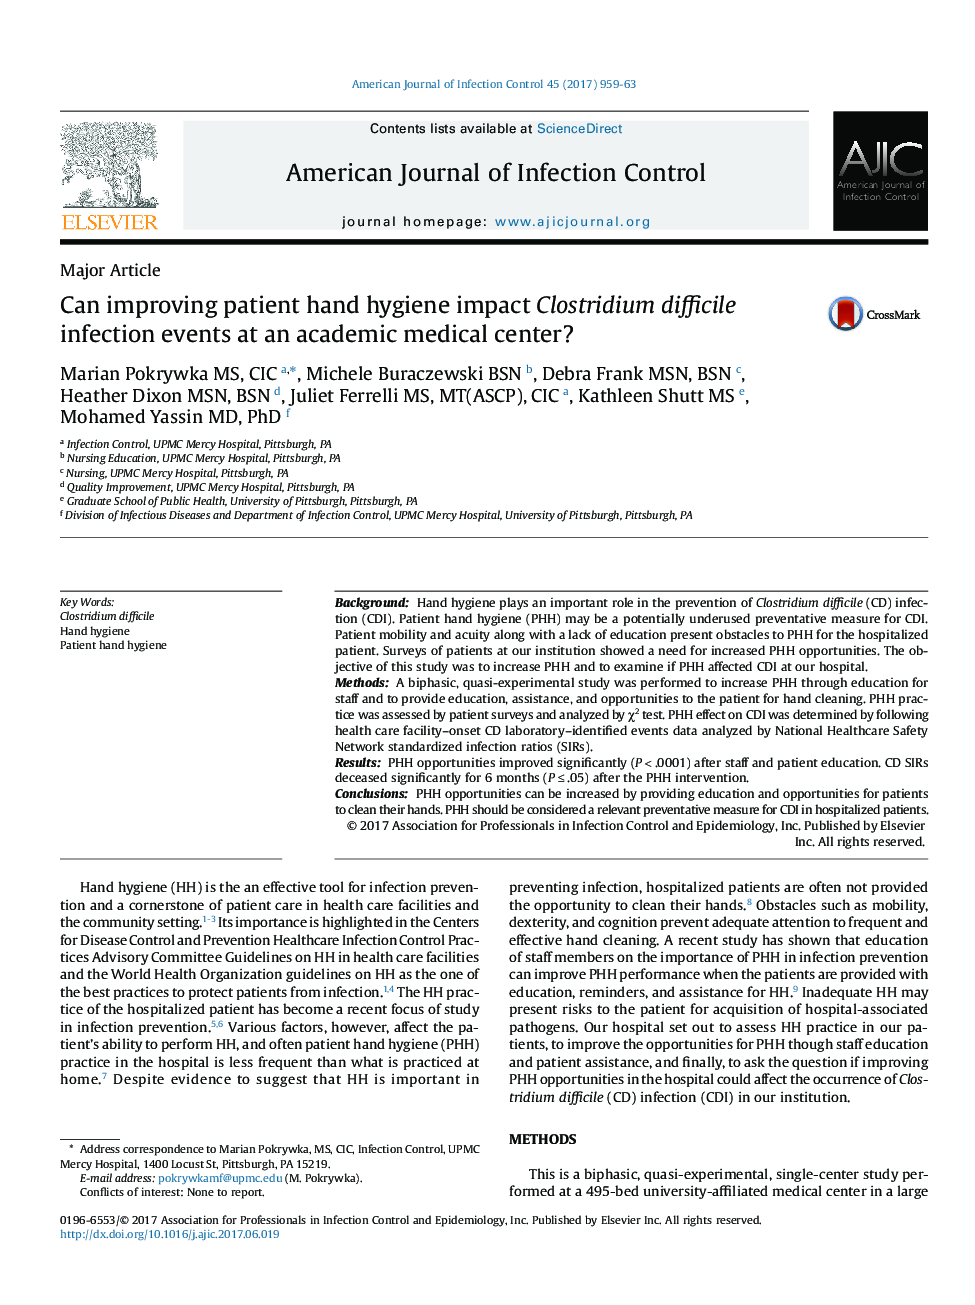 Can improving patient hand hygiene impact Clostridium difficile infection events at an academic medical center?